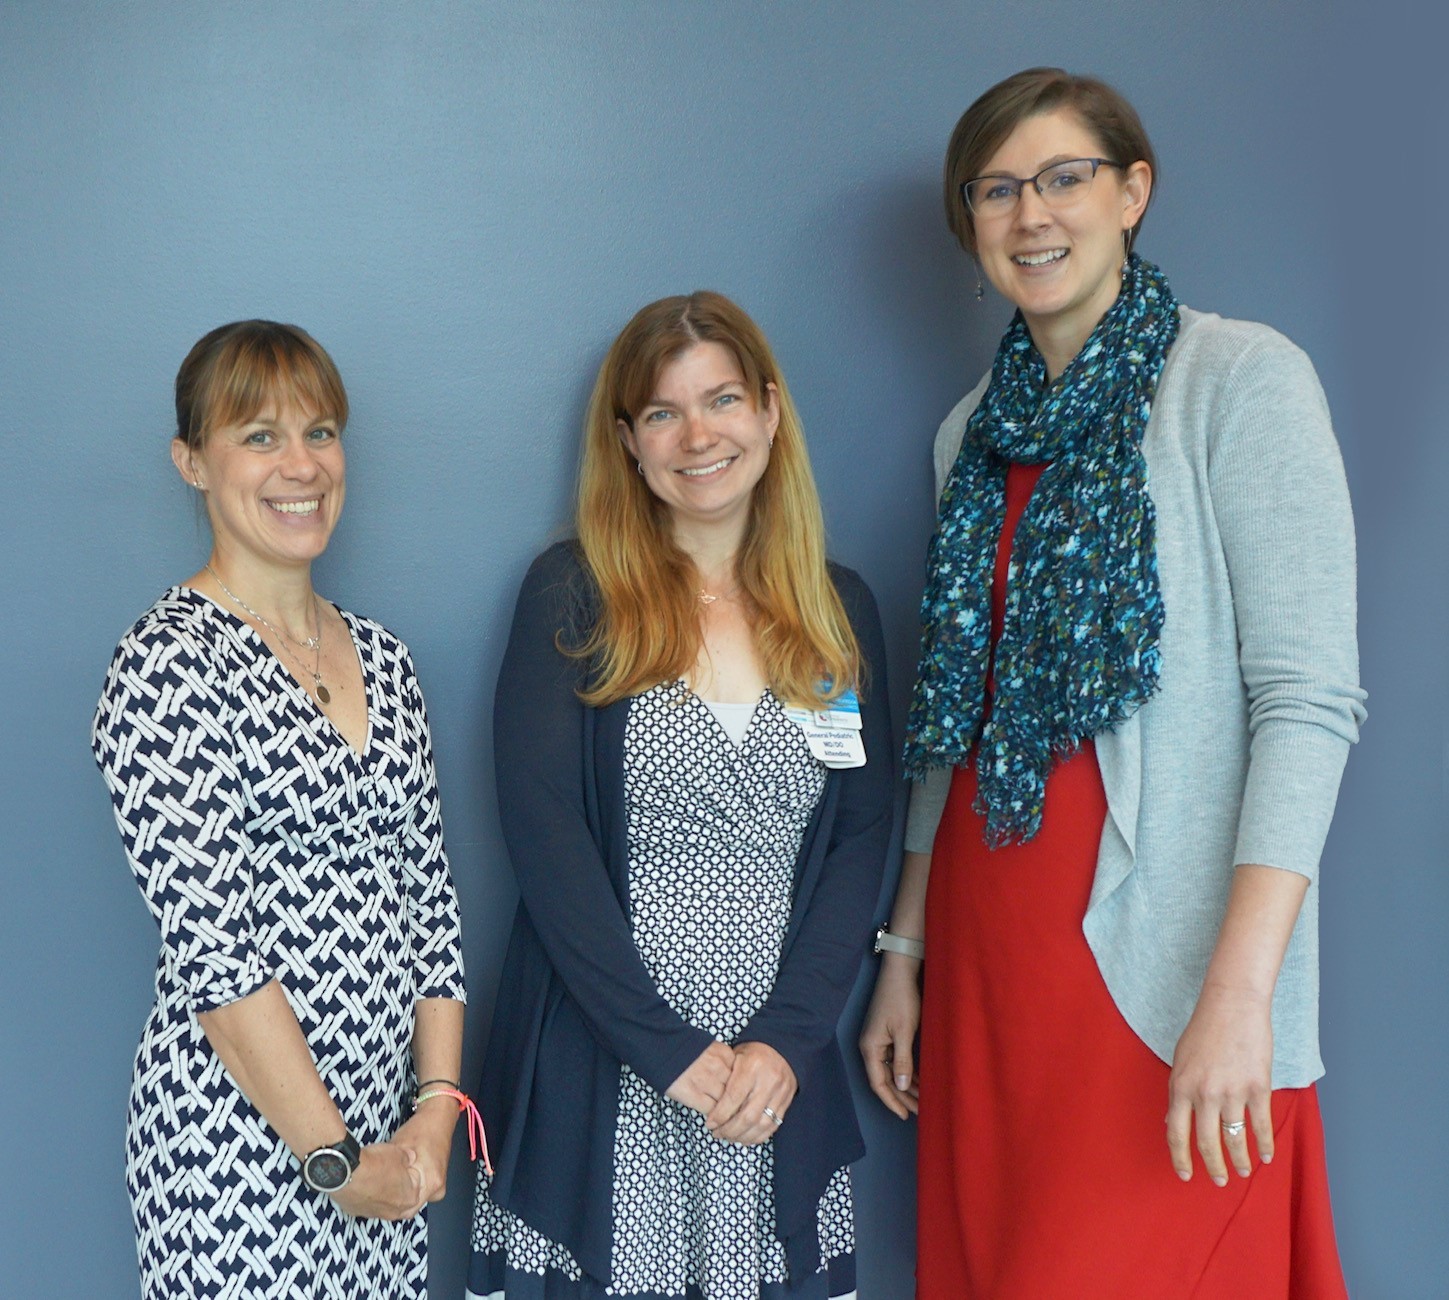 Full sized image of three women at Cincinnati Children's who helped develop the IDENTITY software for foster children